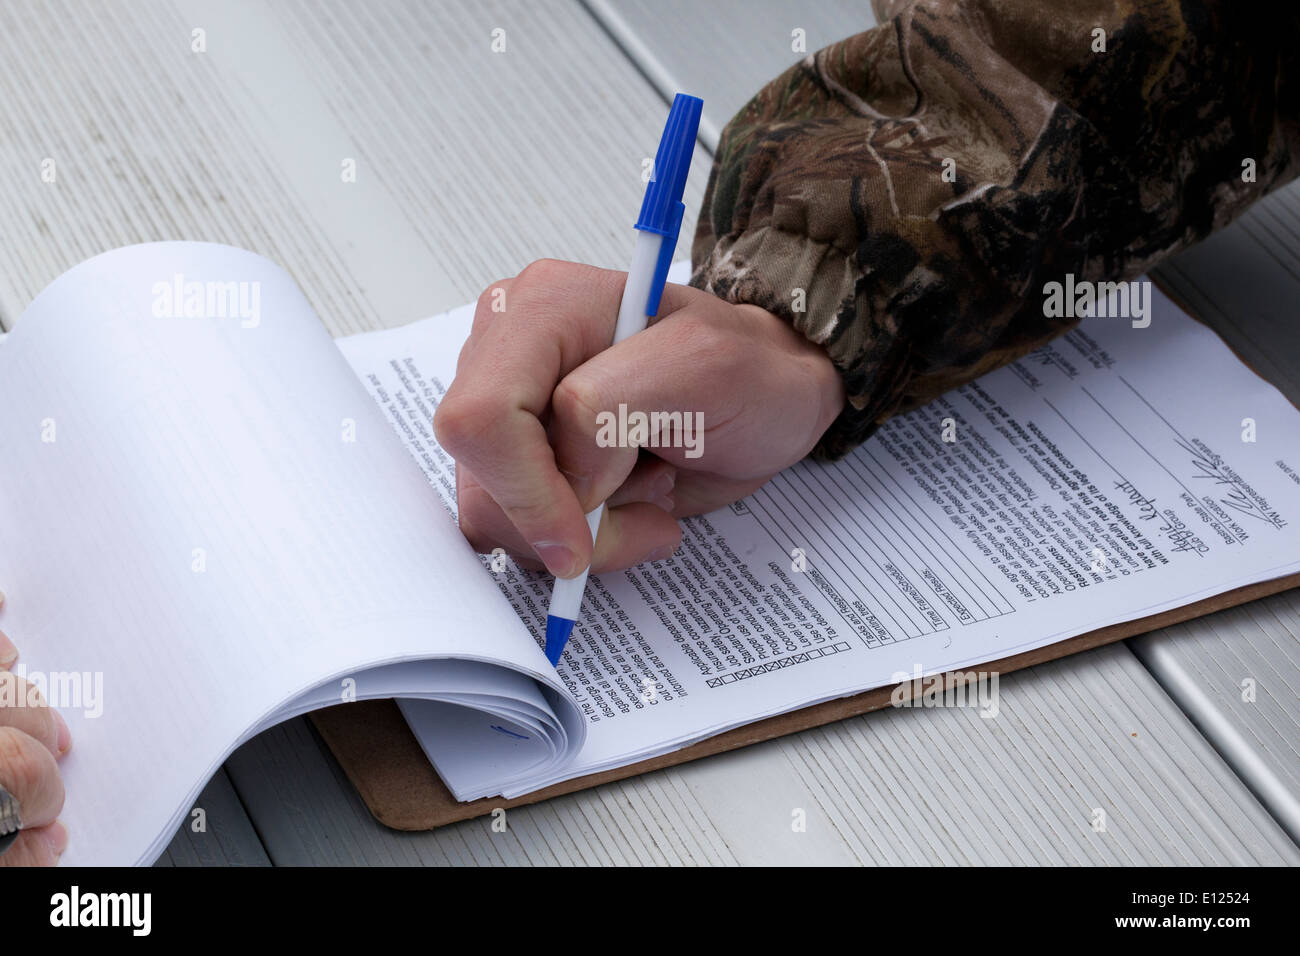 Texas A&M University student signs a release prior to participating in pine tree replanting effort. Stock Photo